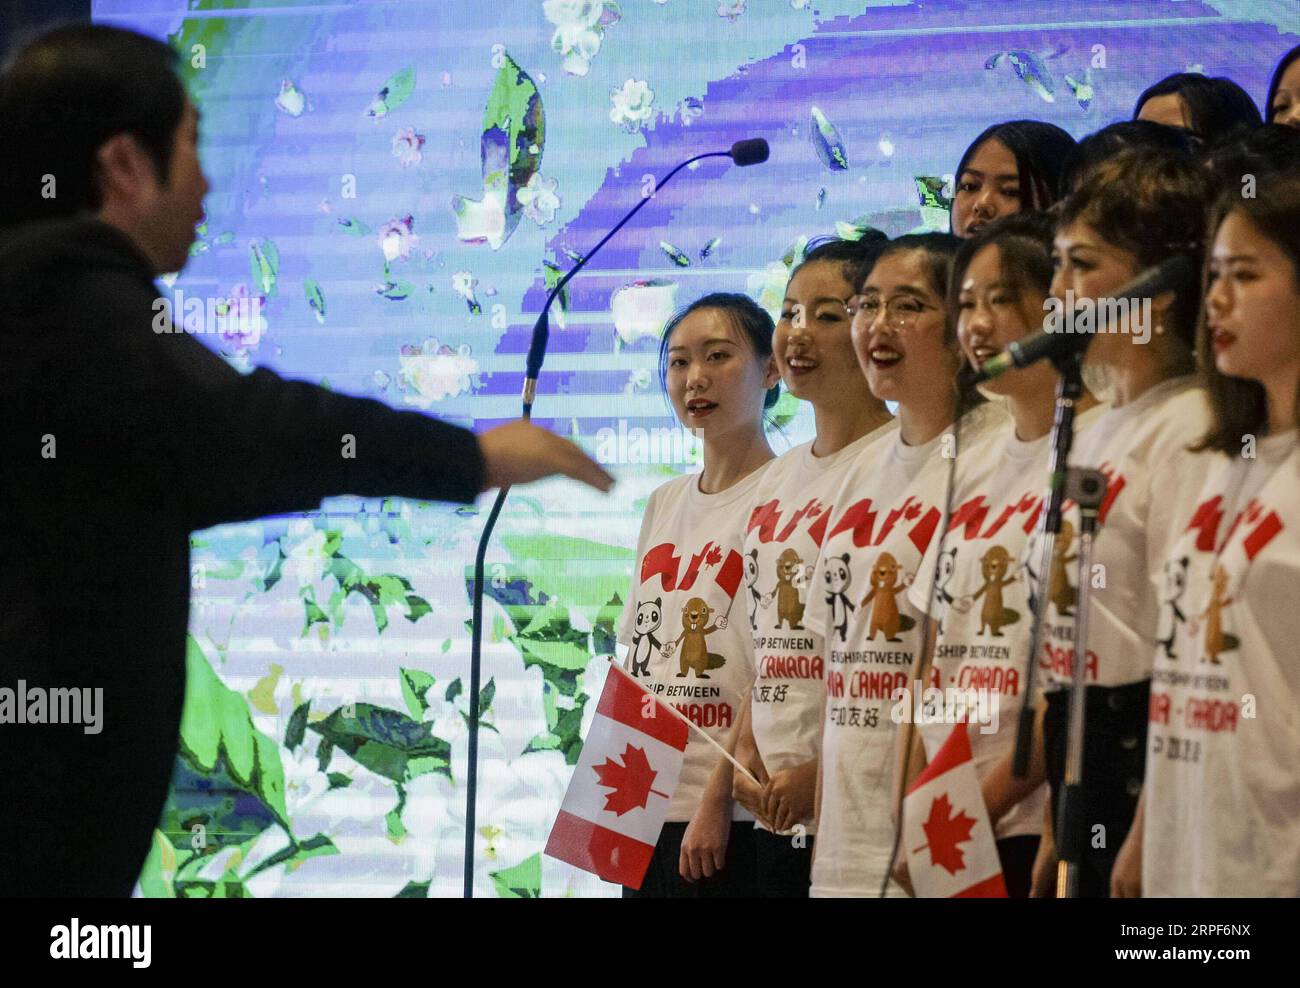 (190915) -- RICHMOND, Sept. 15, 2019 -- A student choir performs on stage at a gala event to celebrate the Mid-Autumn Festival and the 70th anniversary of the founding of the People s Republic of China at Richmond Olympic Oval in Richmond, Canada, Sept. 14, 2019. Liang Sen) CANADA-RICHMOND-CHINESE STUDENTS-CELEBRATION LixBaodong PUBLICATIONxNOTxINxCHN Stock Photo